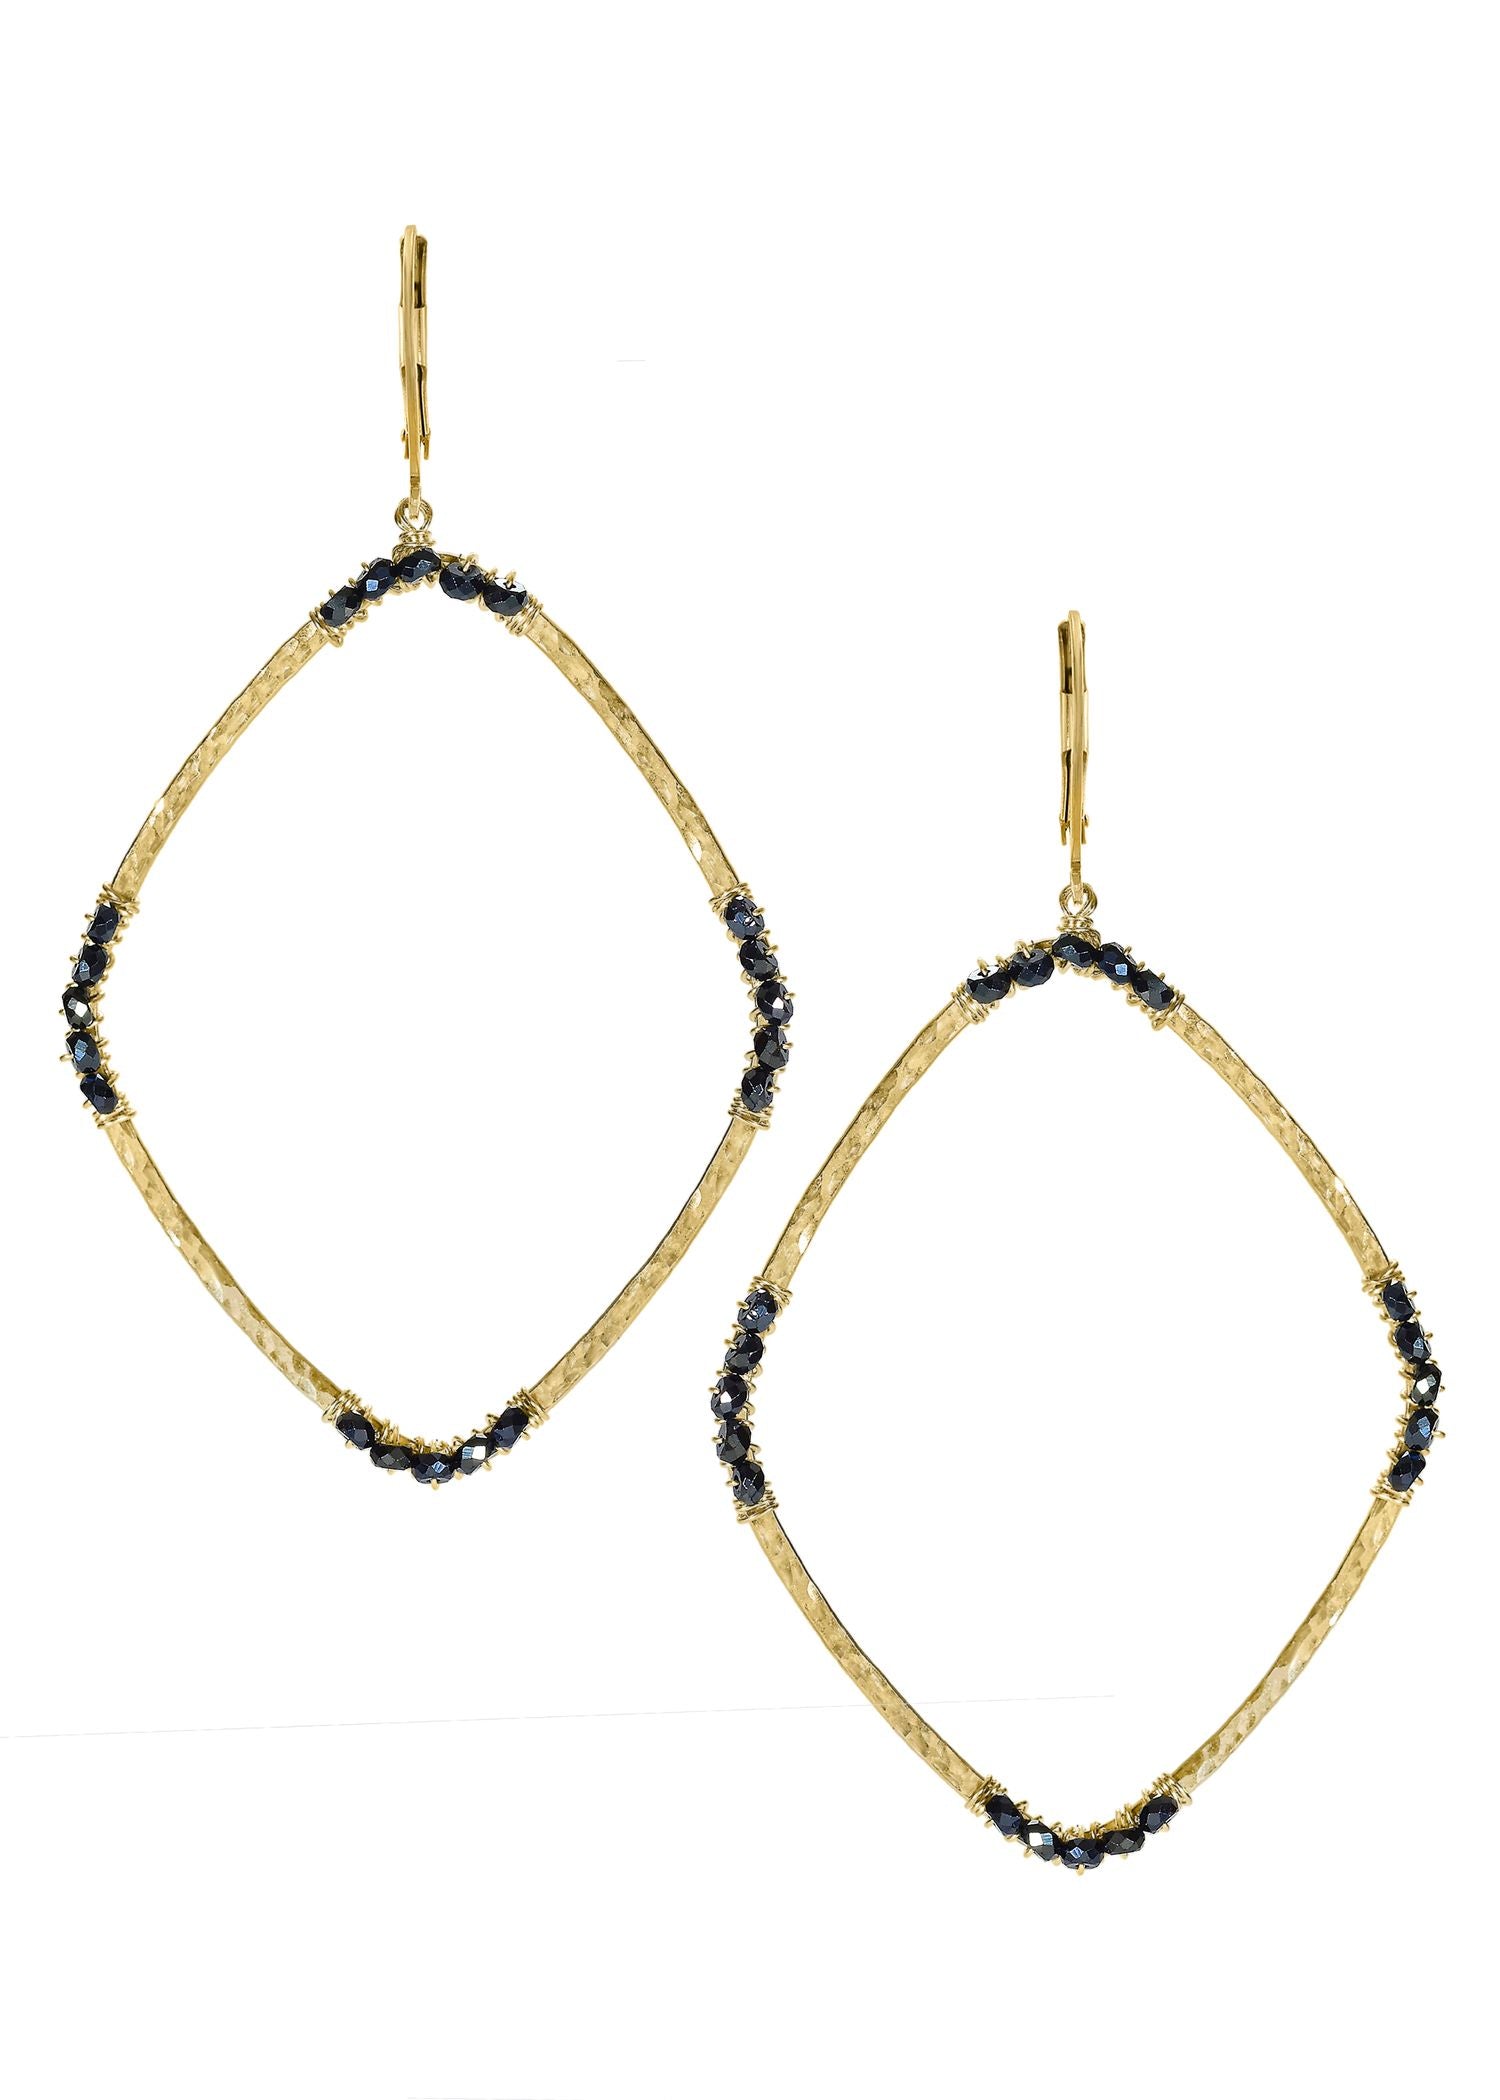 Black spinel 14k gold fill Earrings measure 2-1/2" in length (including the levers) and 1-3/8" in width Handmade in our Los Angeles studio